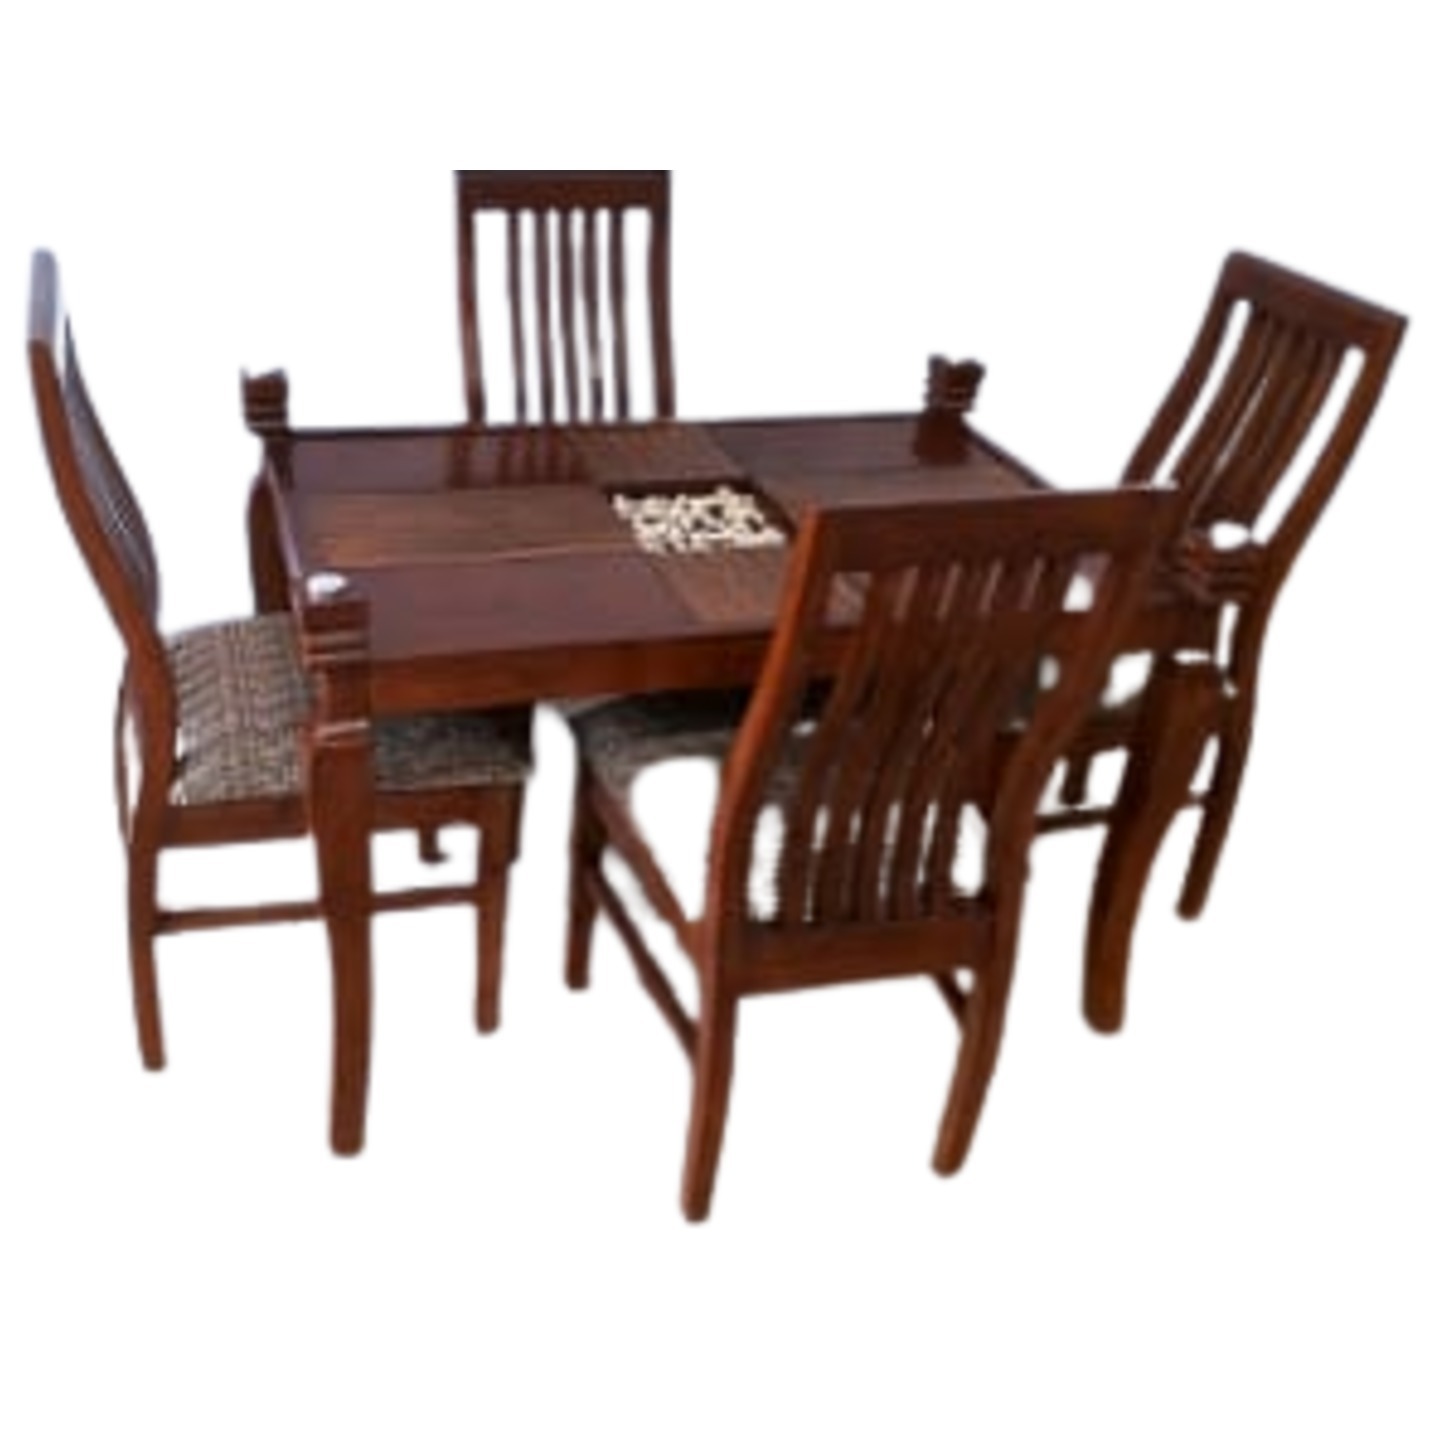 DW Glass Top L-002 Four Seater Dining Table Set in Brown Colour